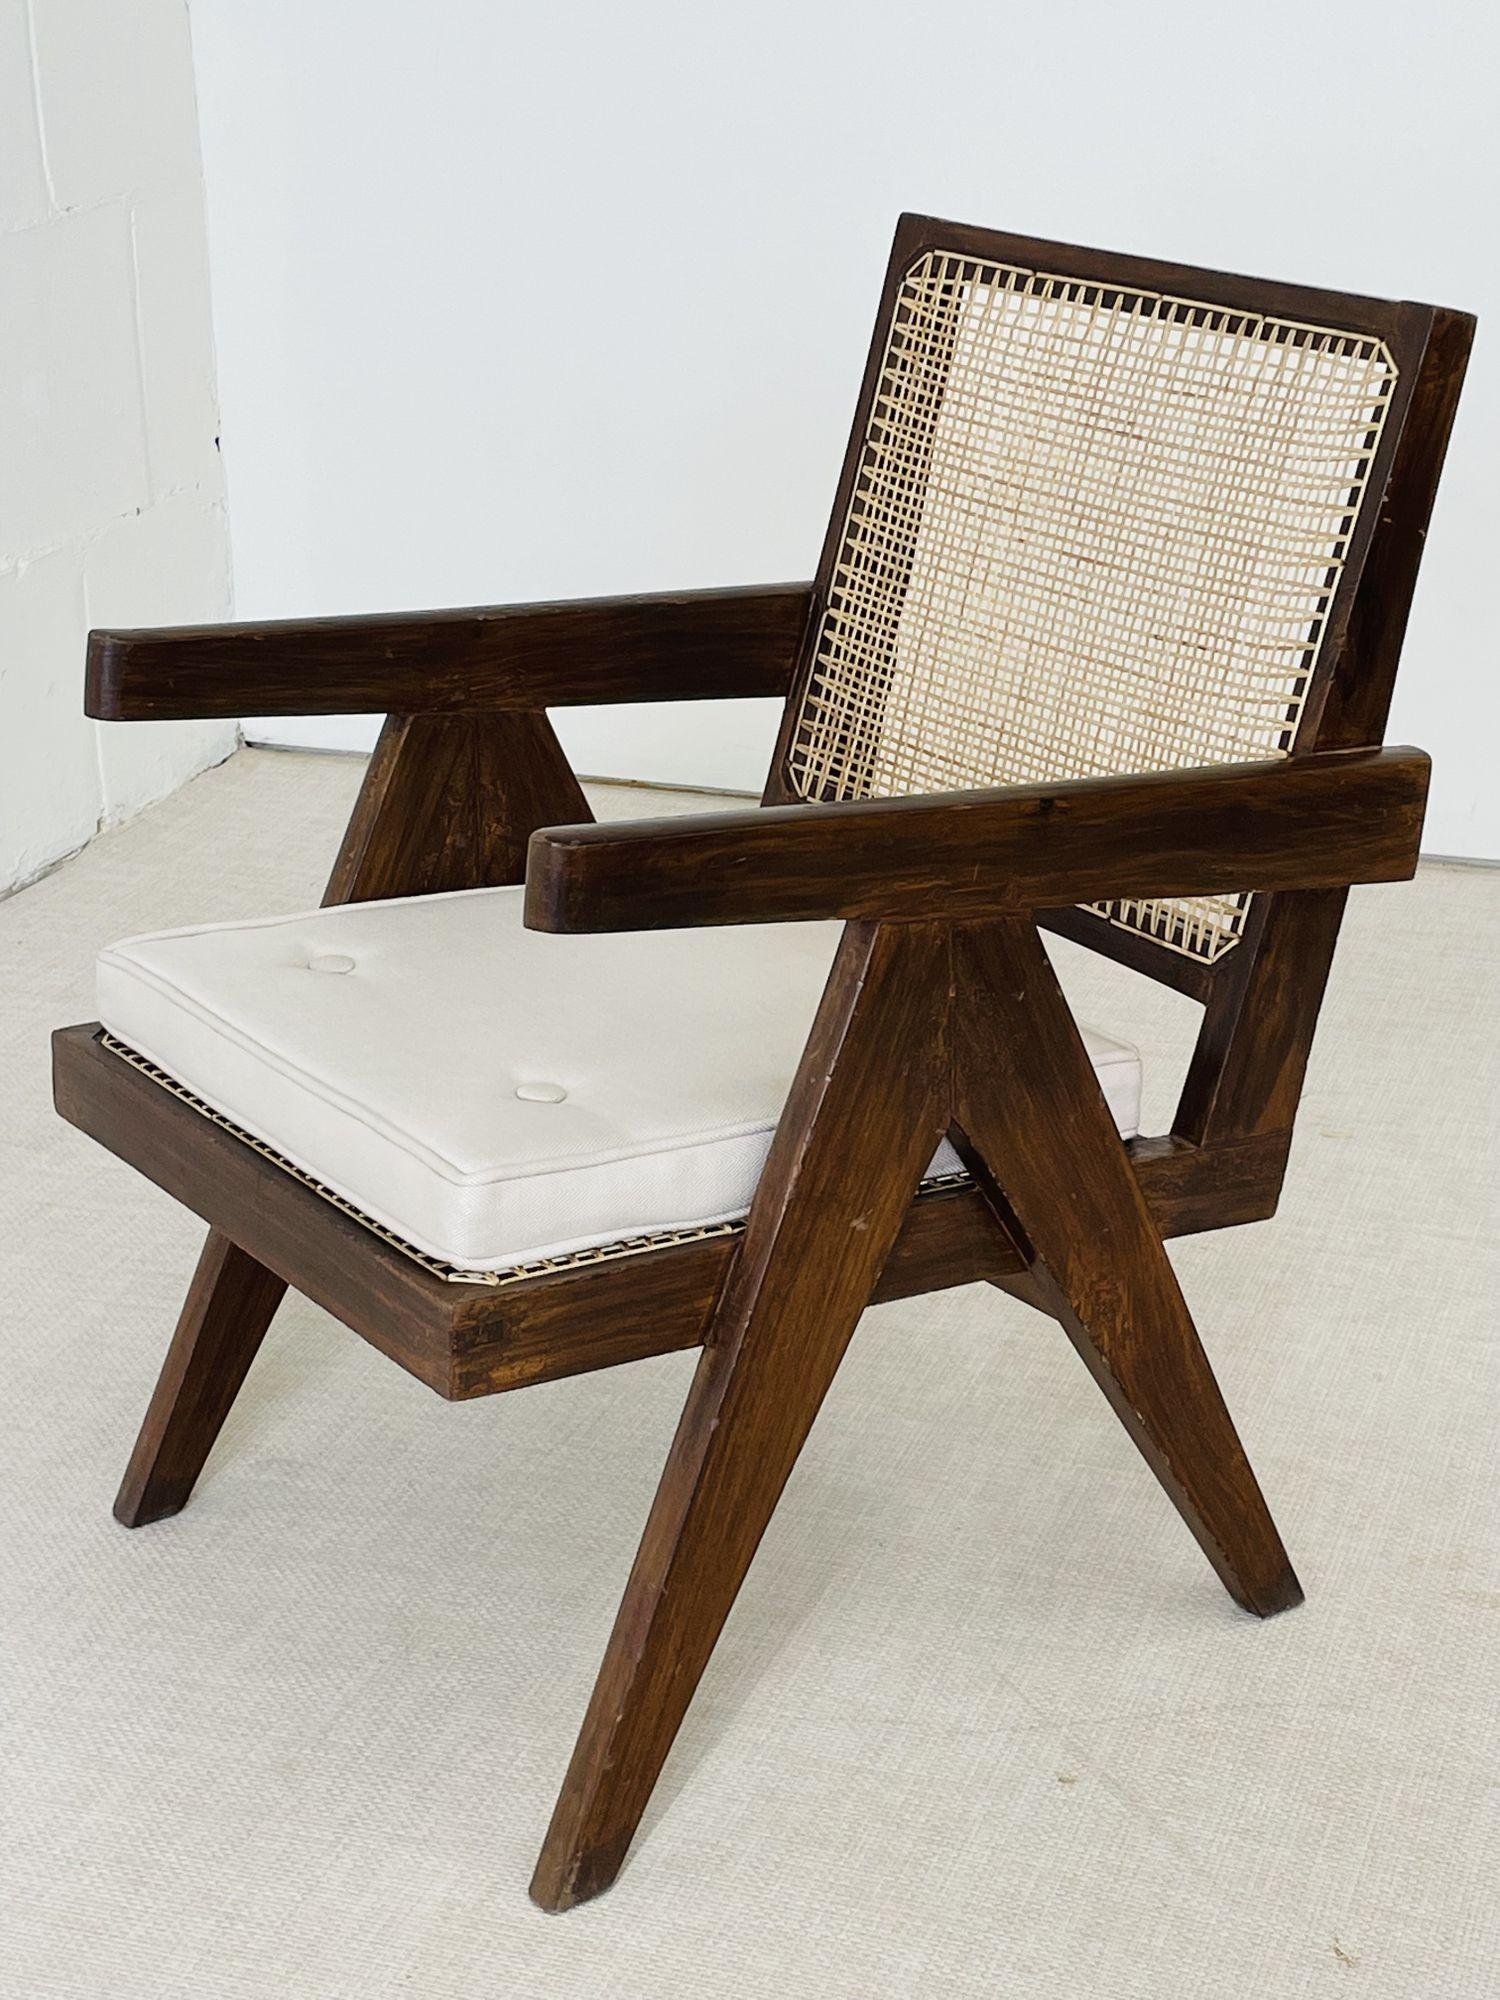 20th Century Pierre Jeanneret, French Mid-Century Modern, Lounge Chairs, Cane, Chandigarh For Sale